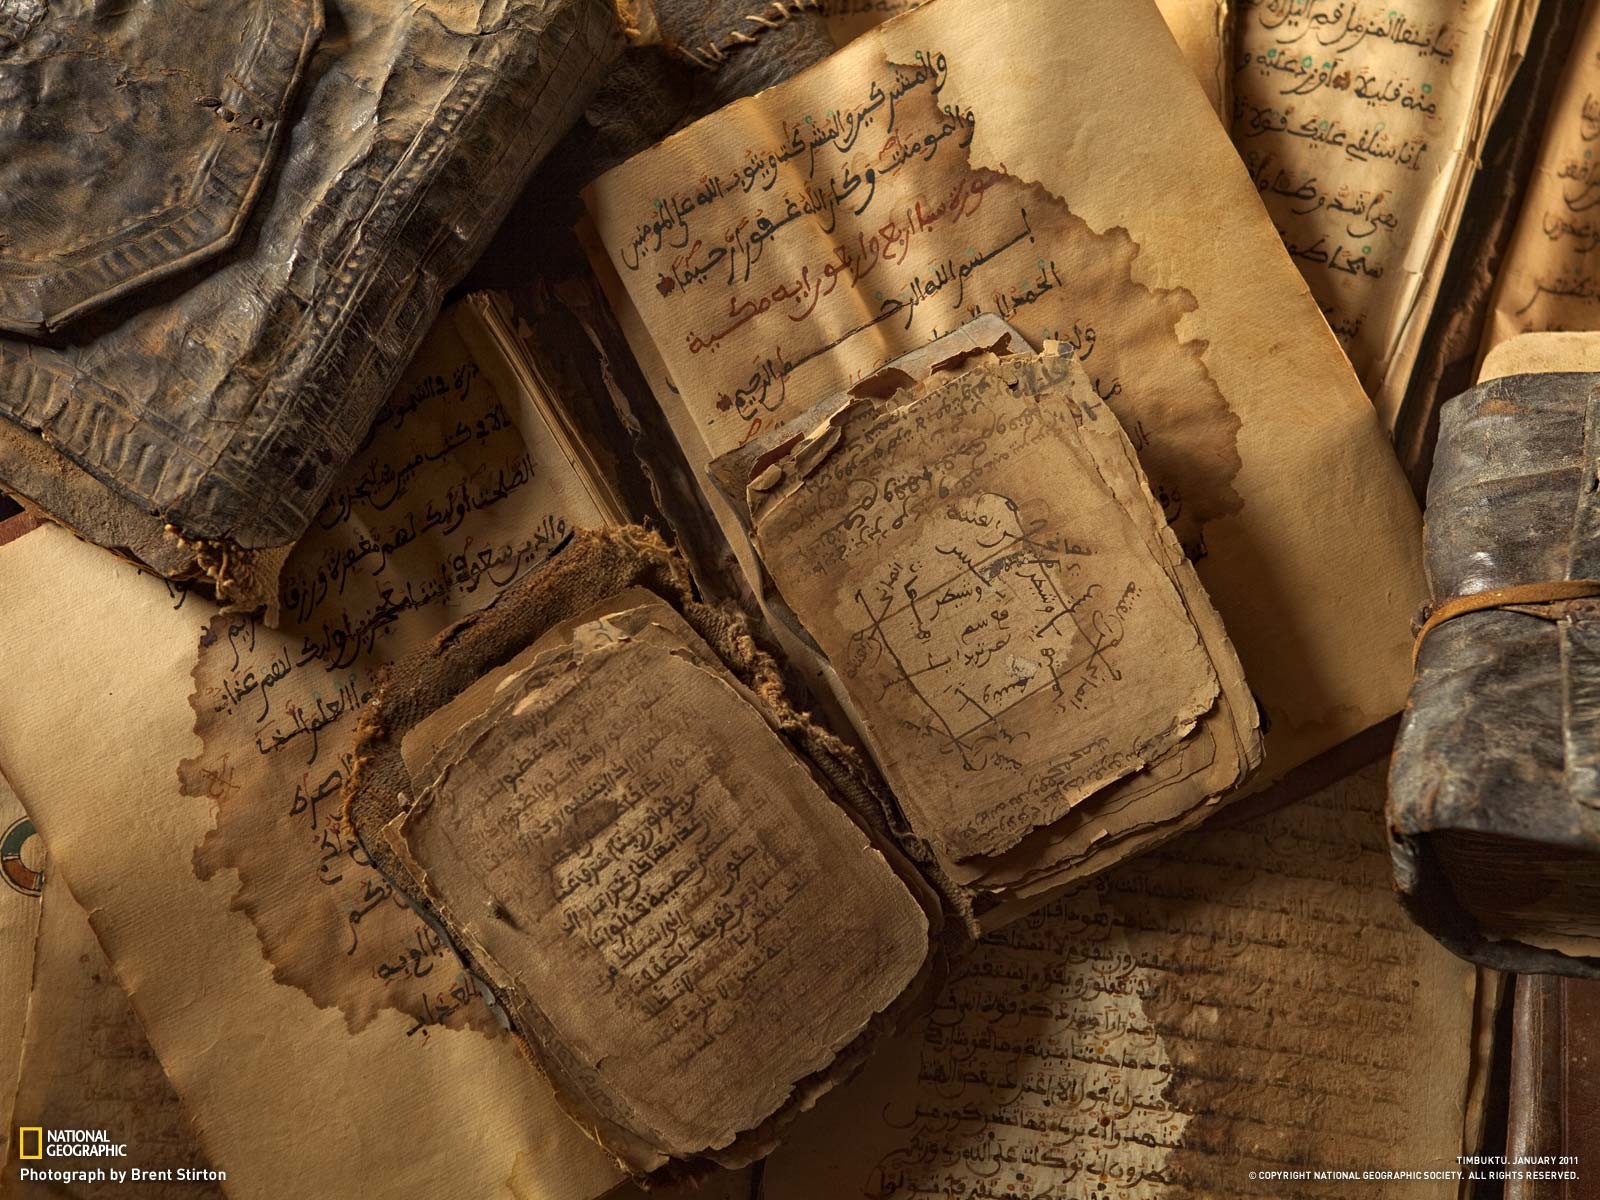 Ancient Arabic books wallpapers and images - wallpapers, pictures